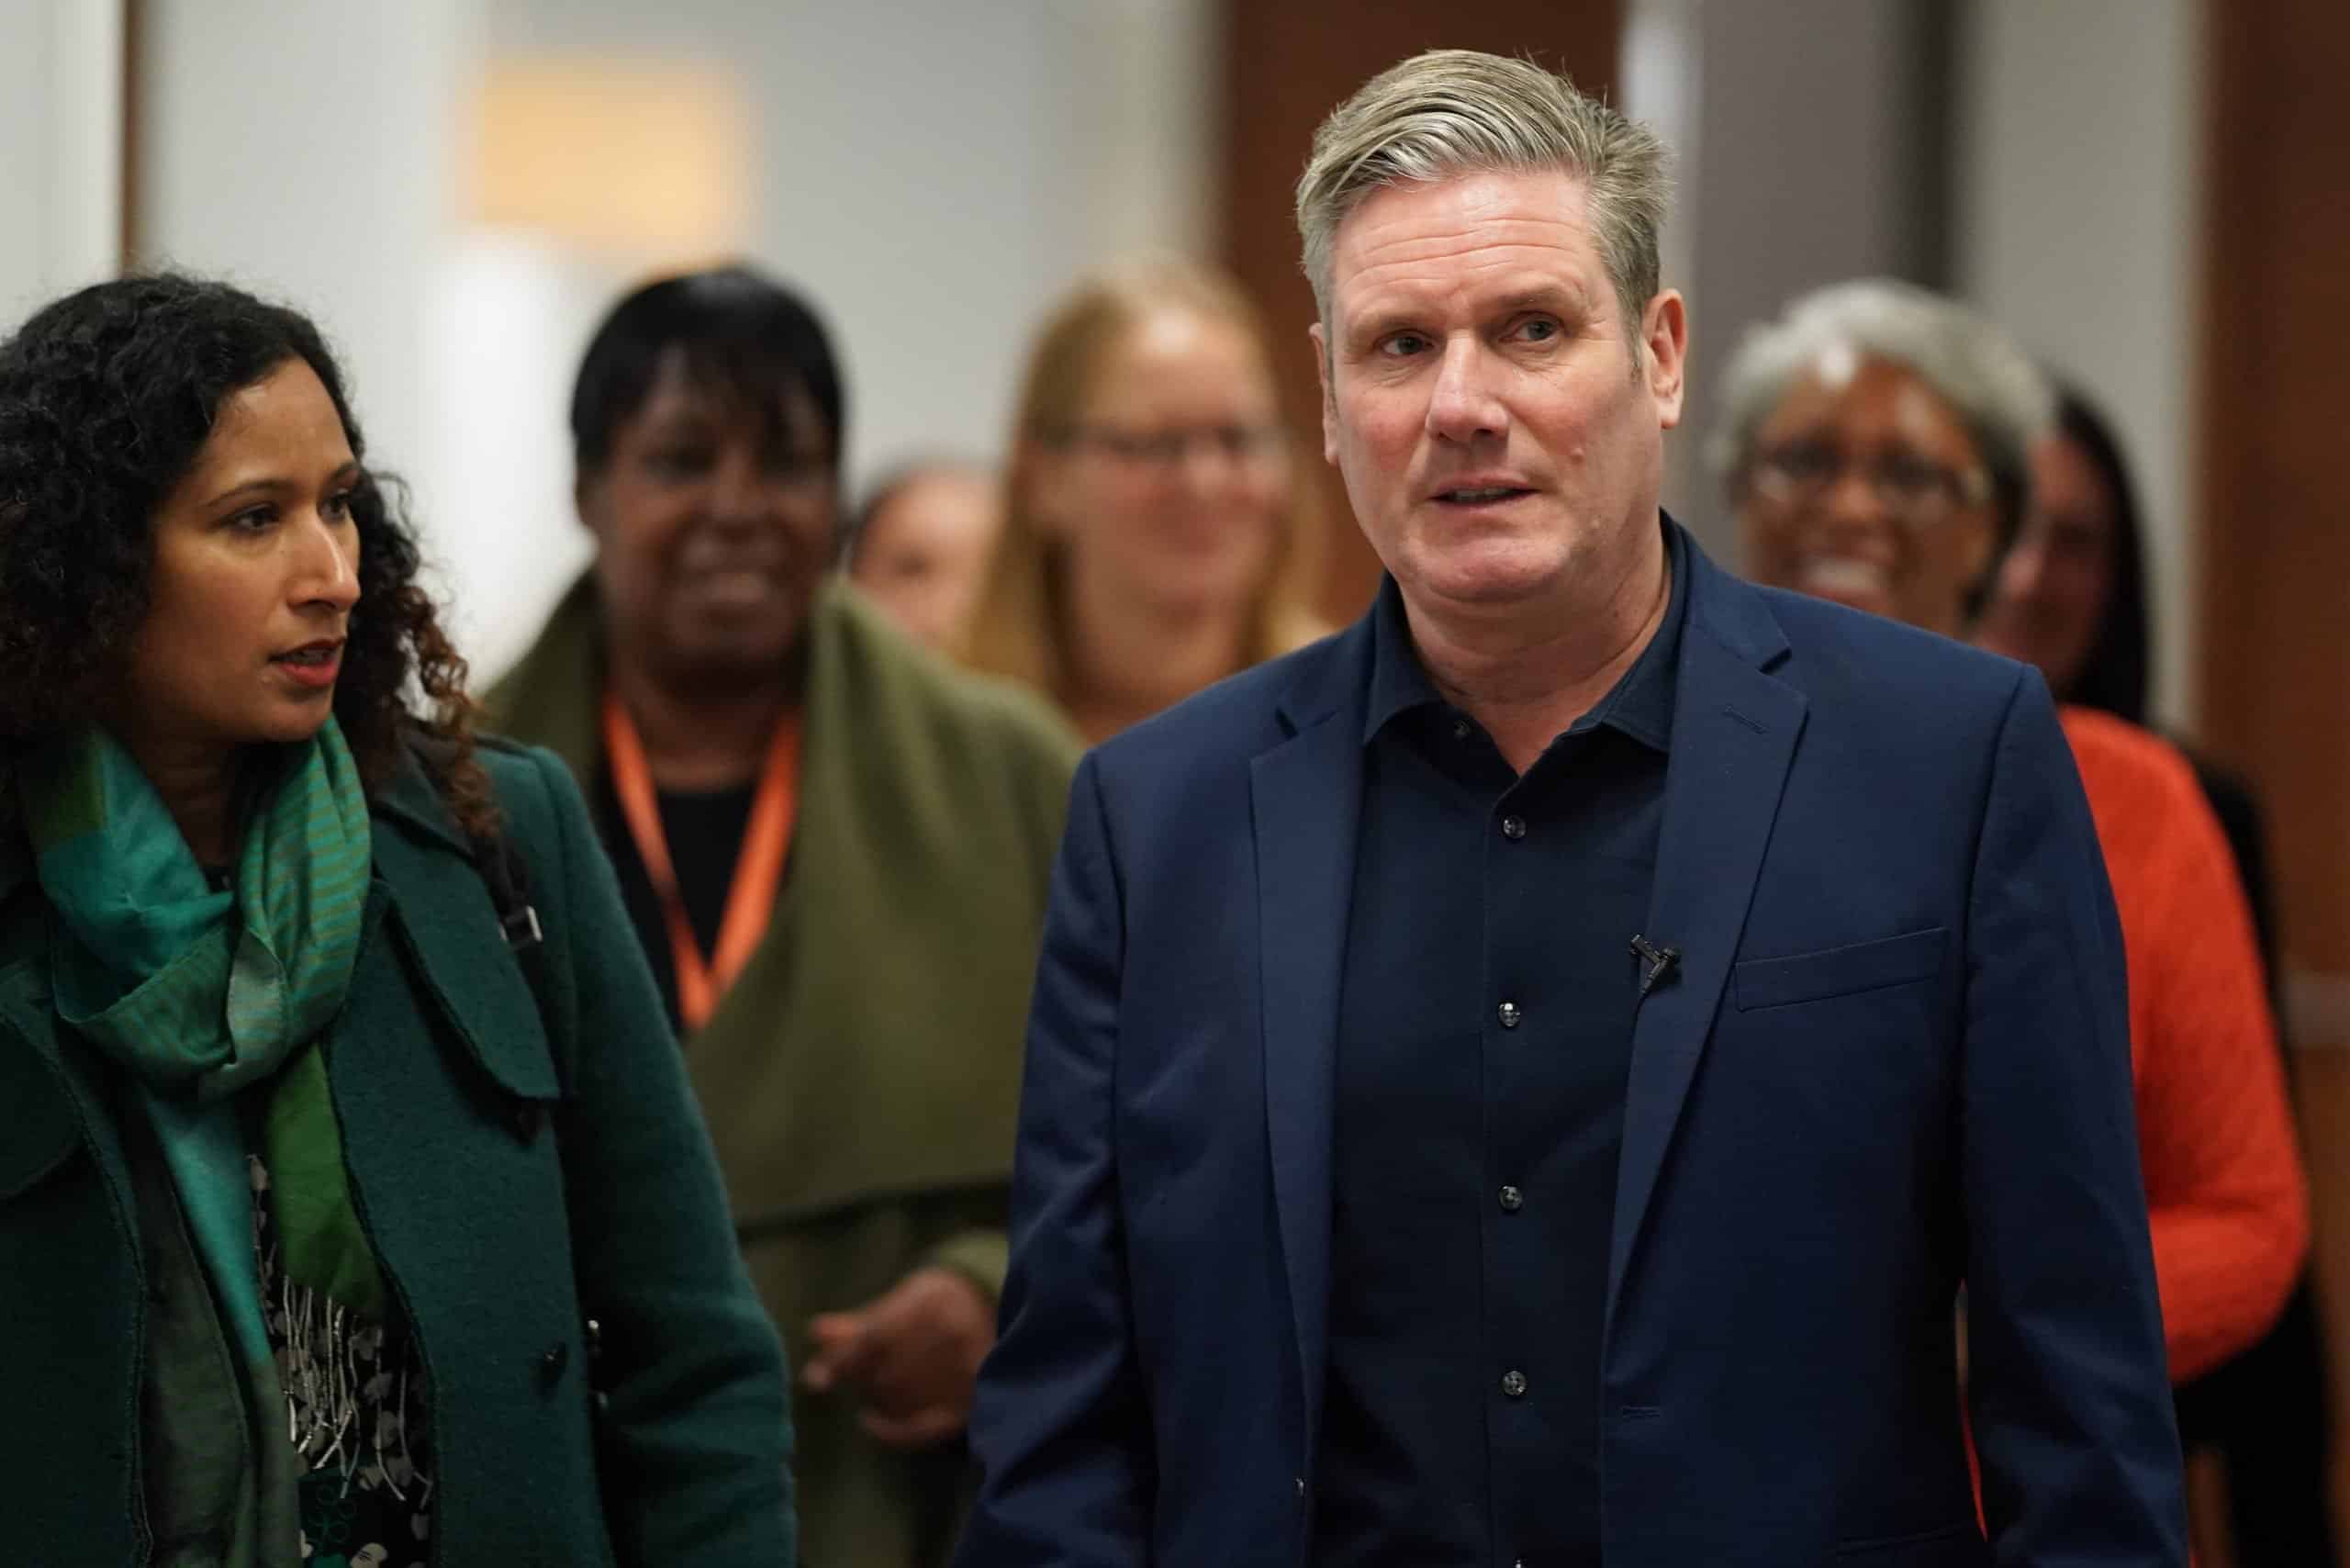 Poll suggests Labour attacks ads have backfired for Starmer